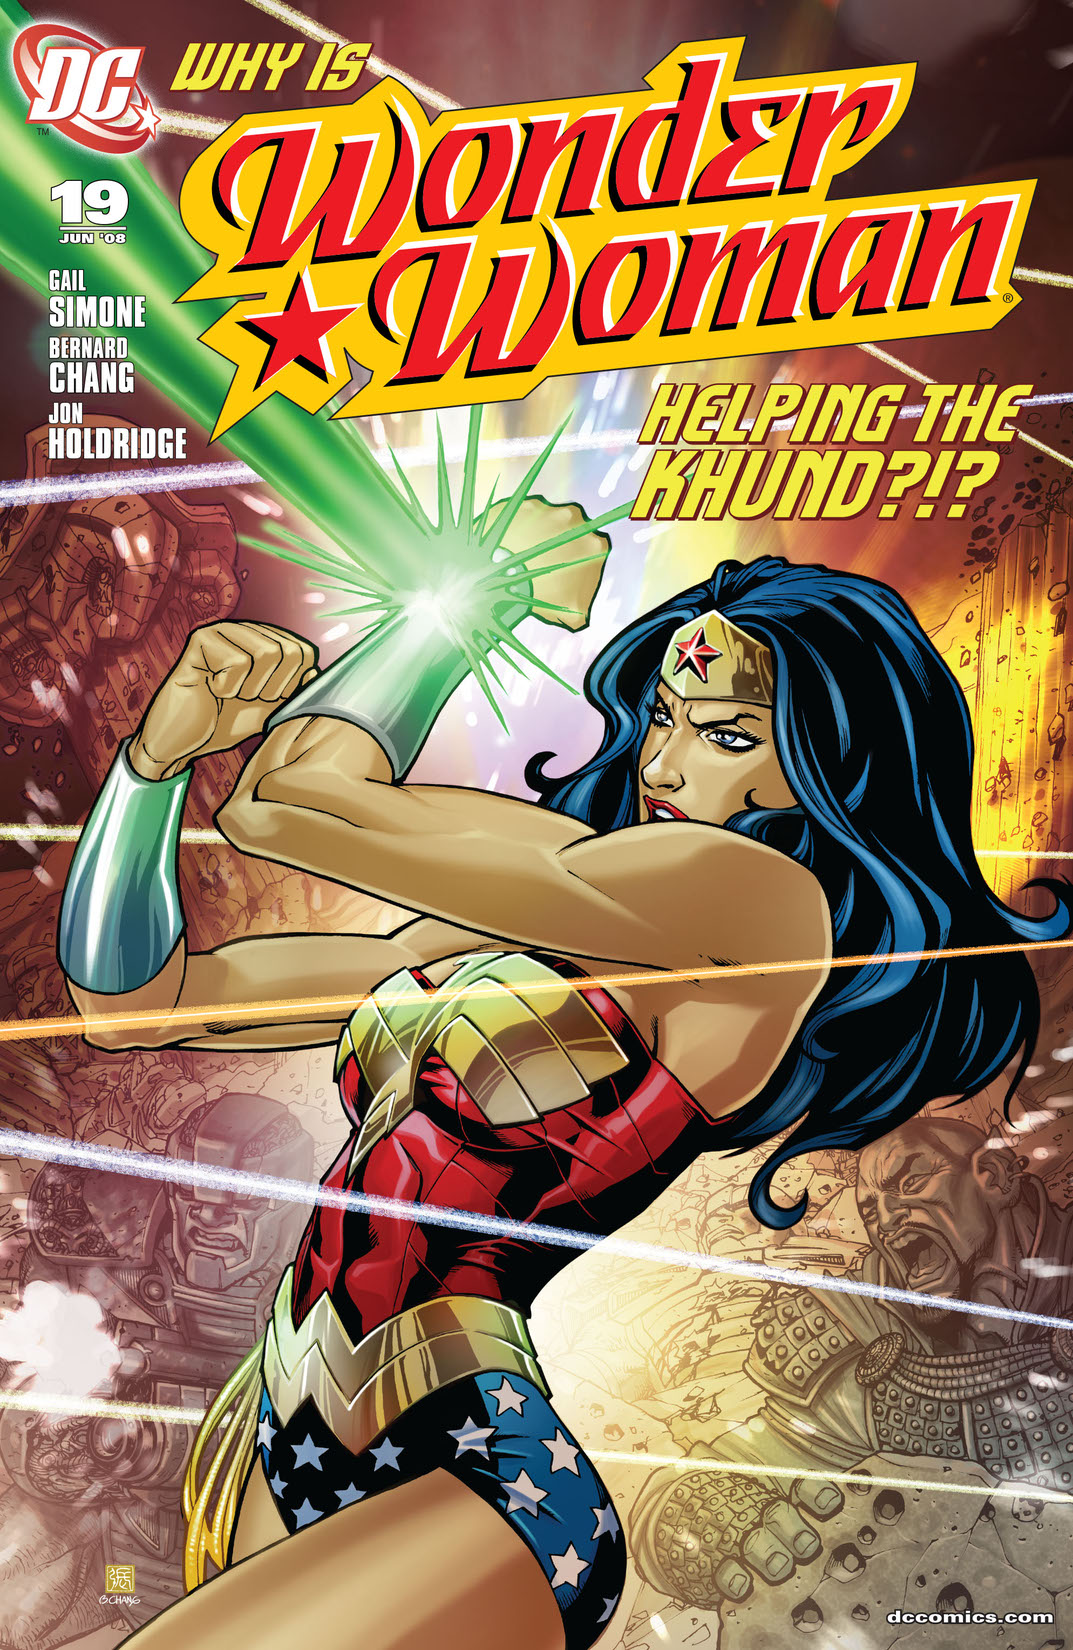 Wonder Woman (2006-) #19 preview images